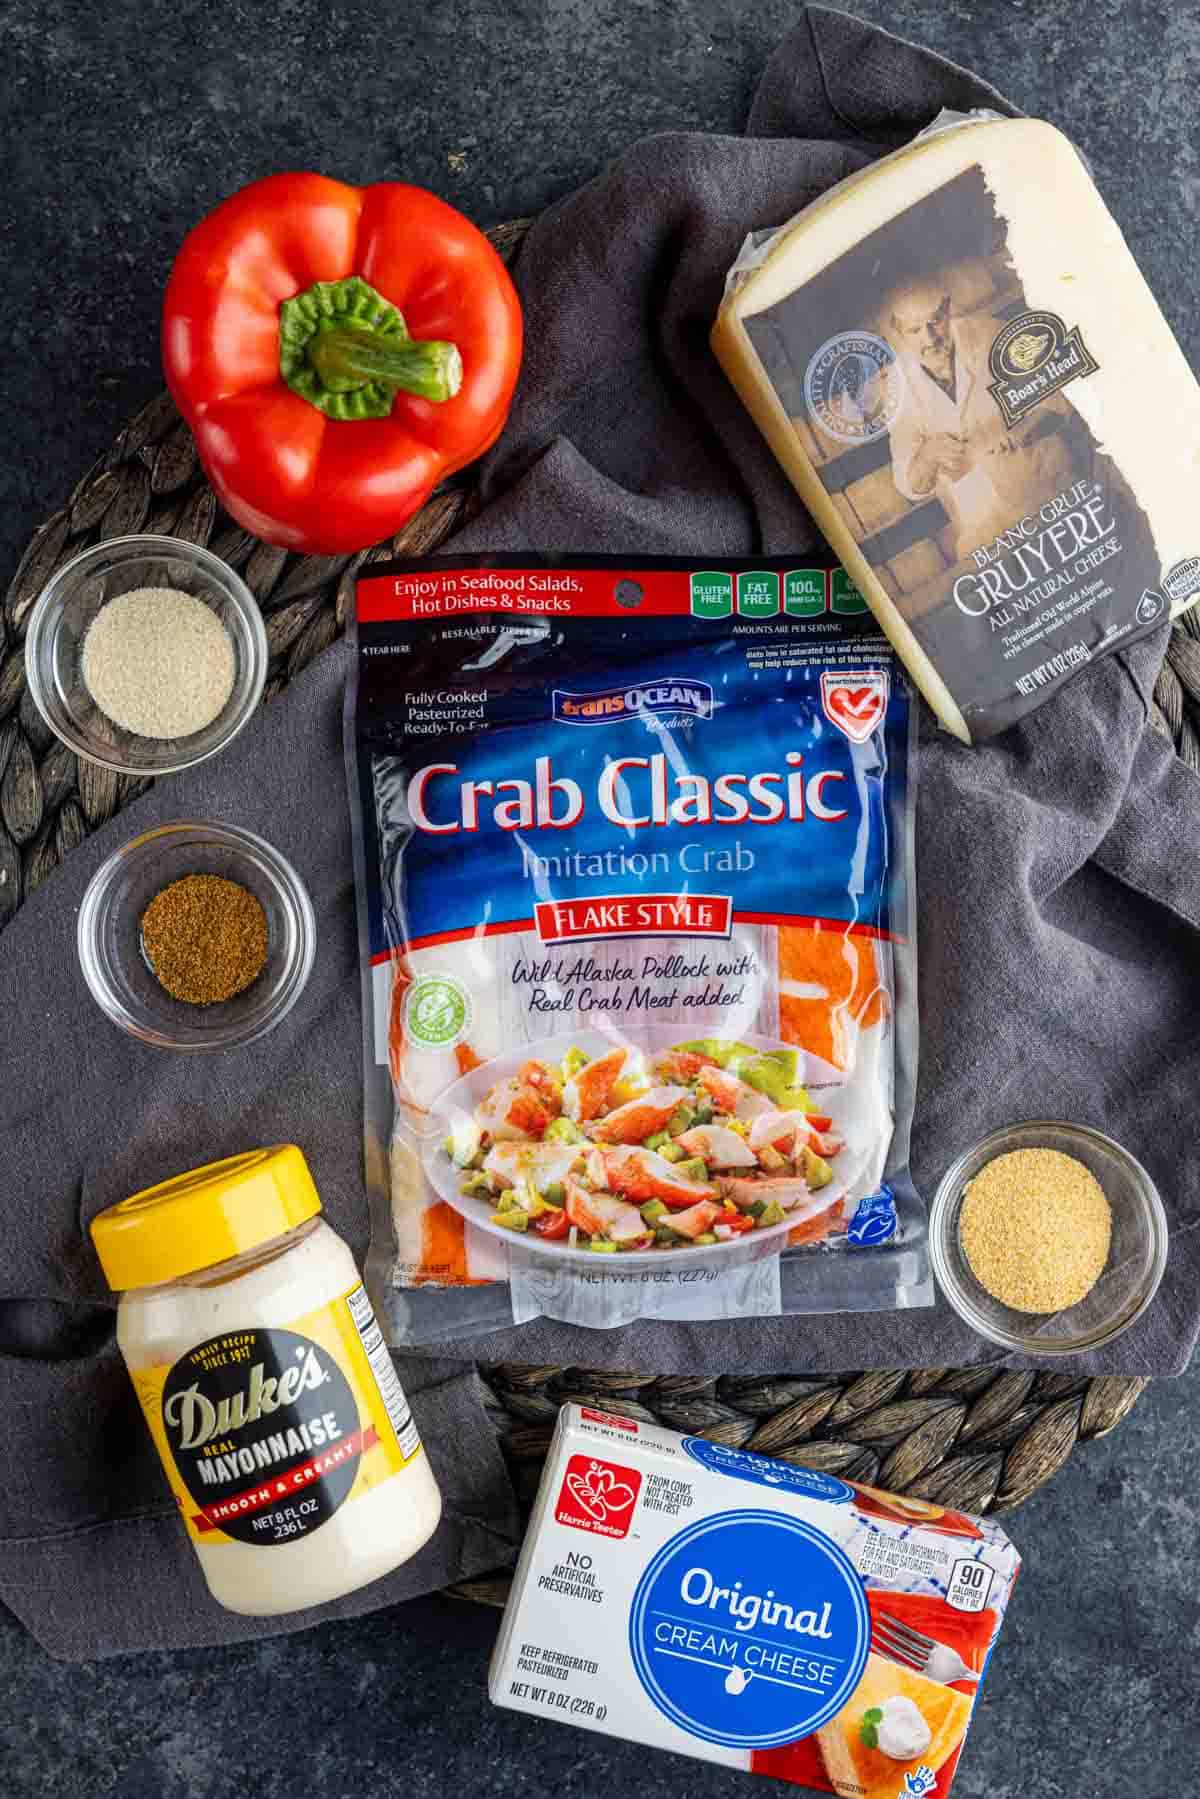 The ingredients for a crab classic sandwich on a gray plate.